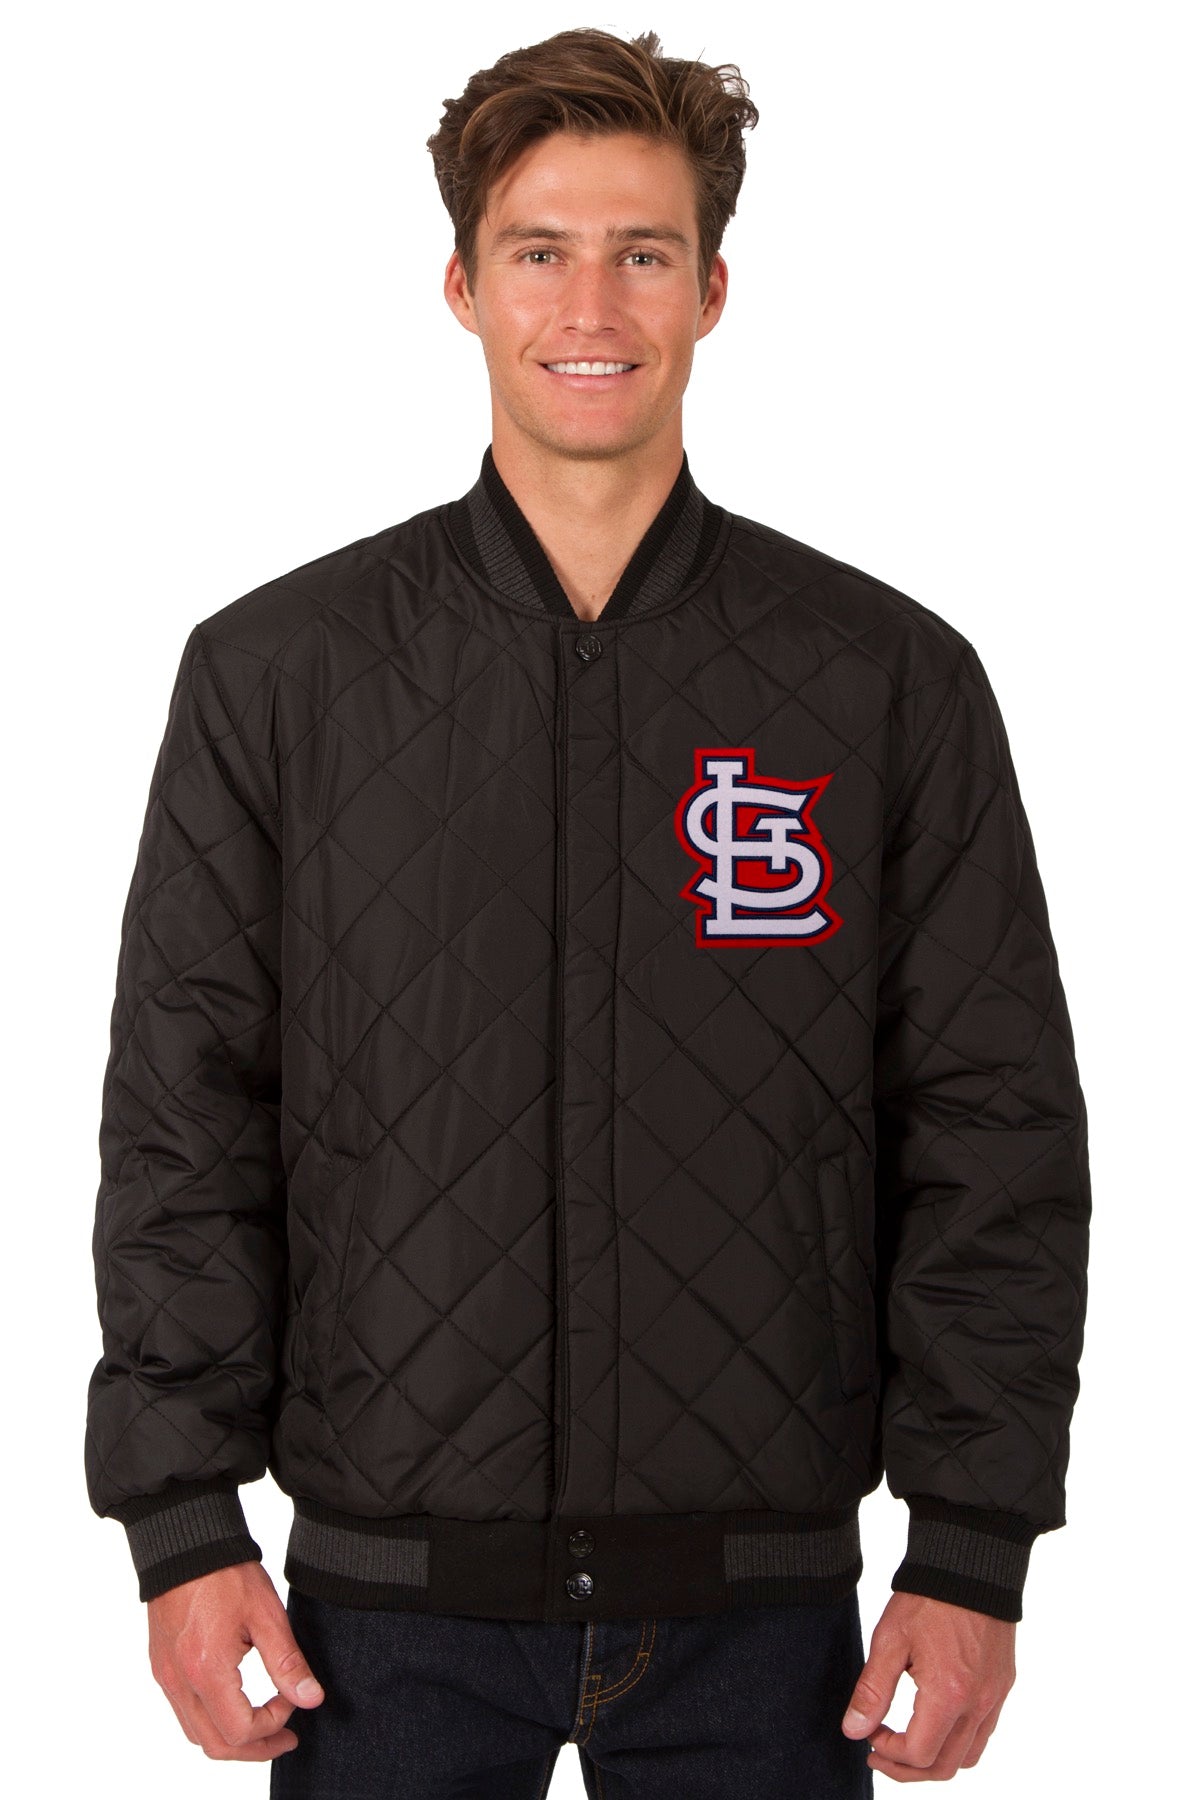 St. Louis Cardinals Reversible Wool and Leather Jacket